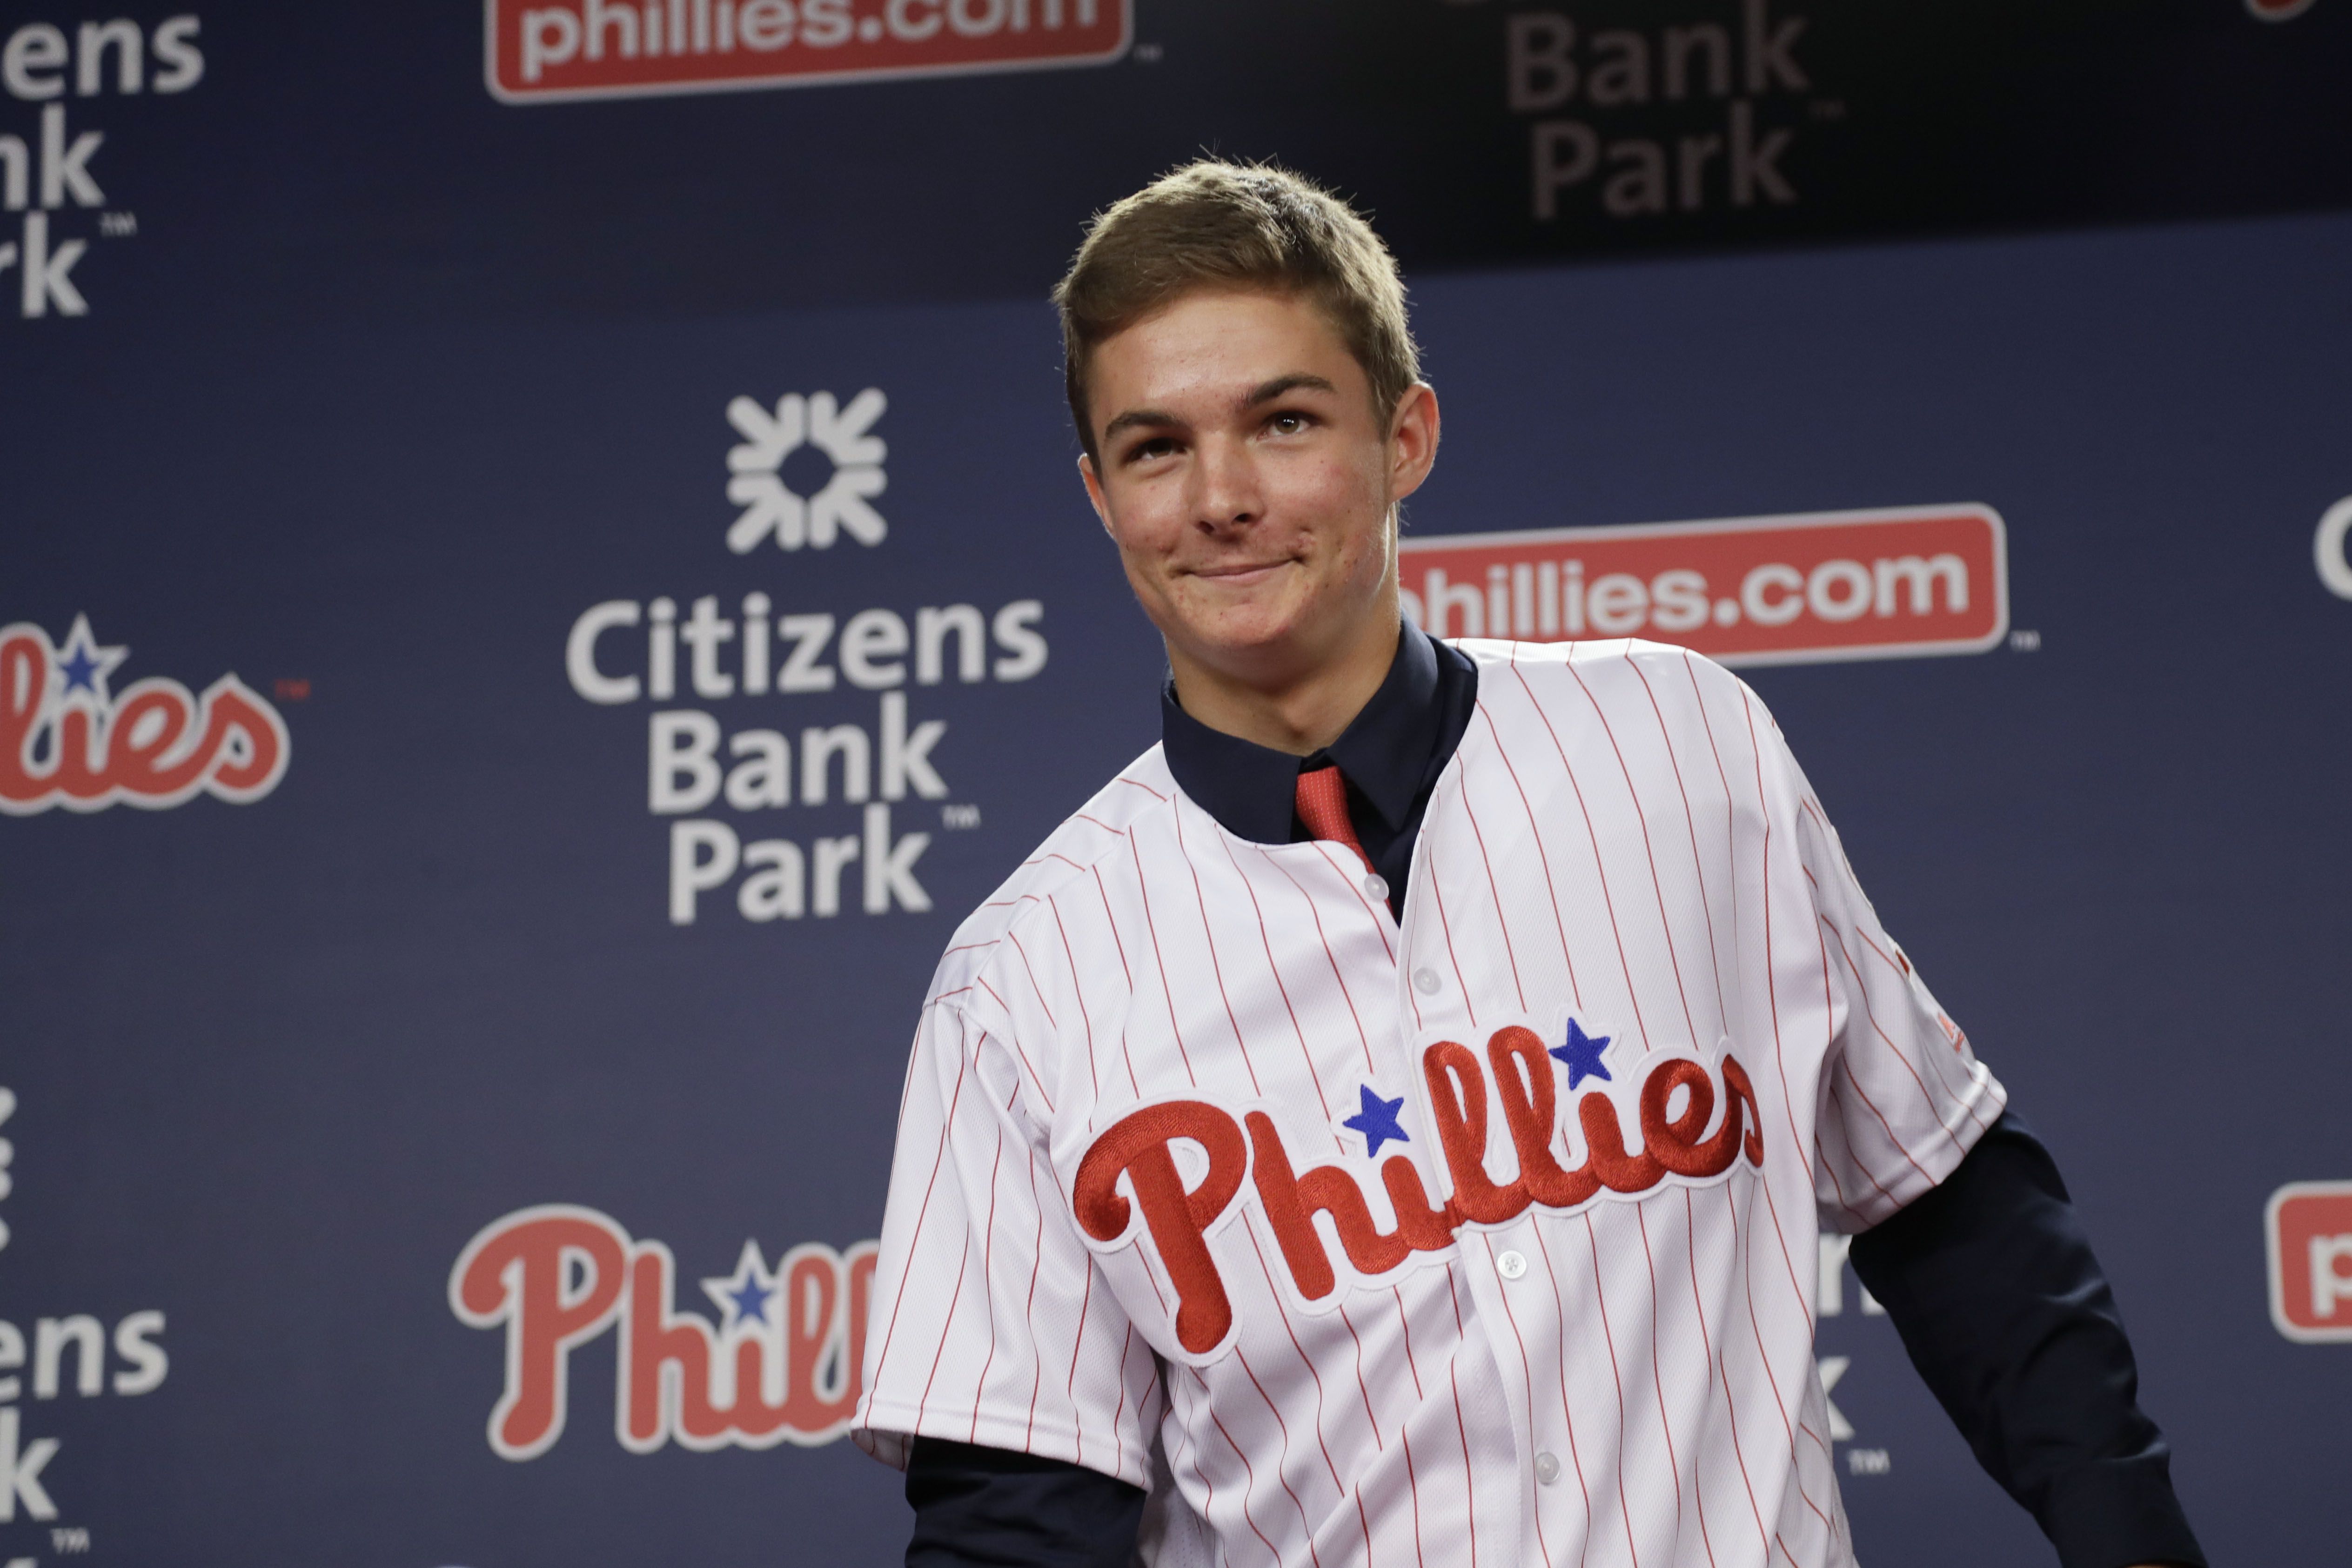 No. 1 pick Mickey Moniak's star never shined with Phillies, but